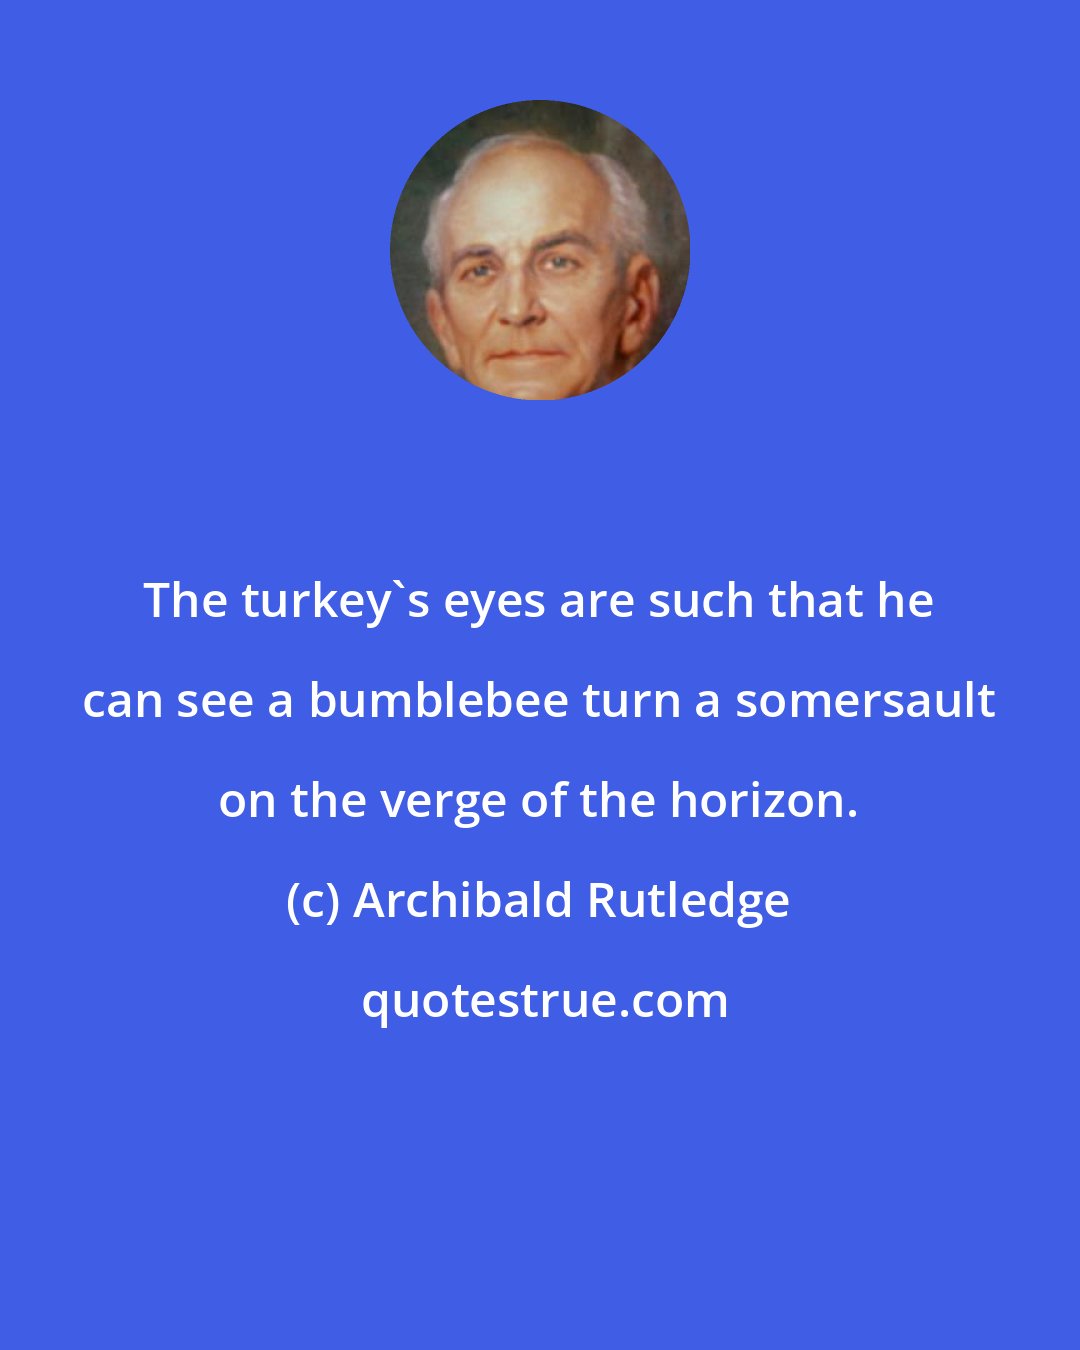 Archibald Rutledge: The turkey's eyes are such that he can see a bumblebee turn a somersault on the verge of the horizon.